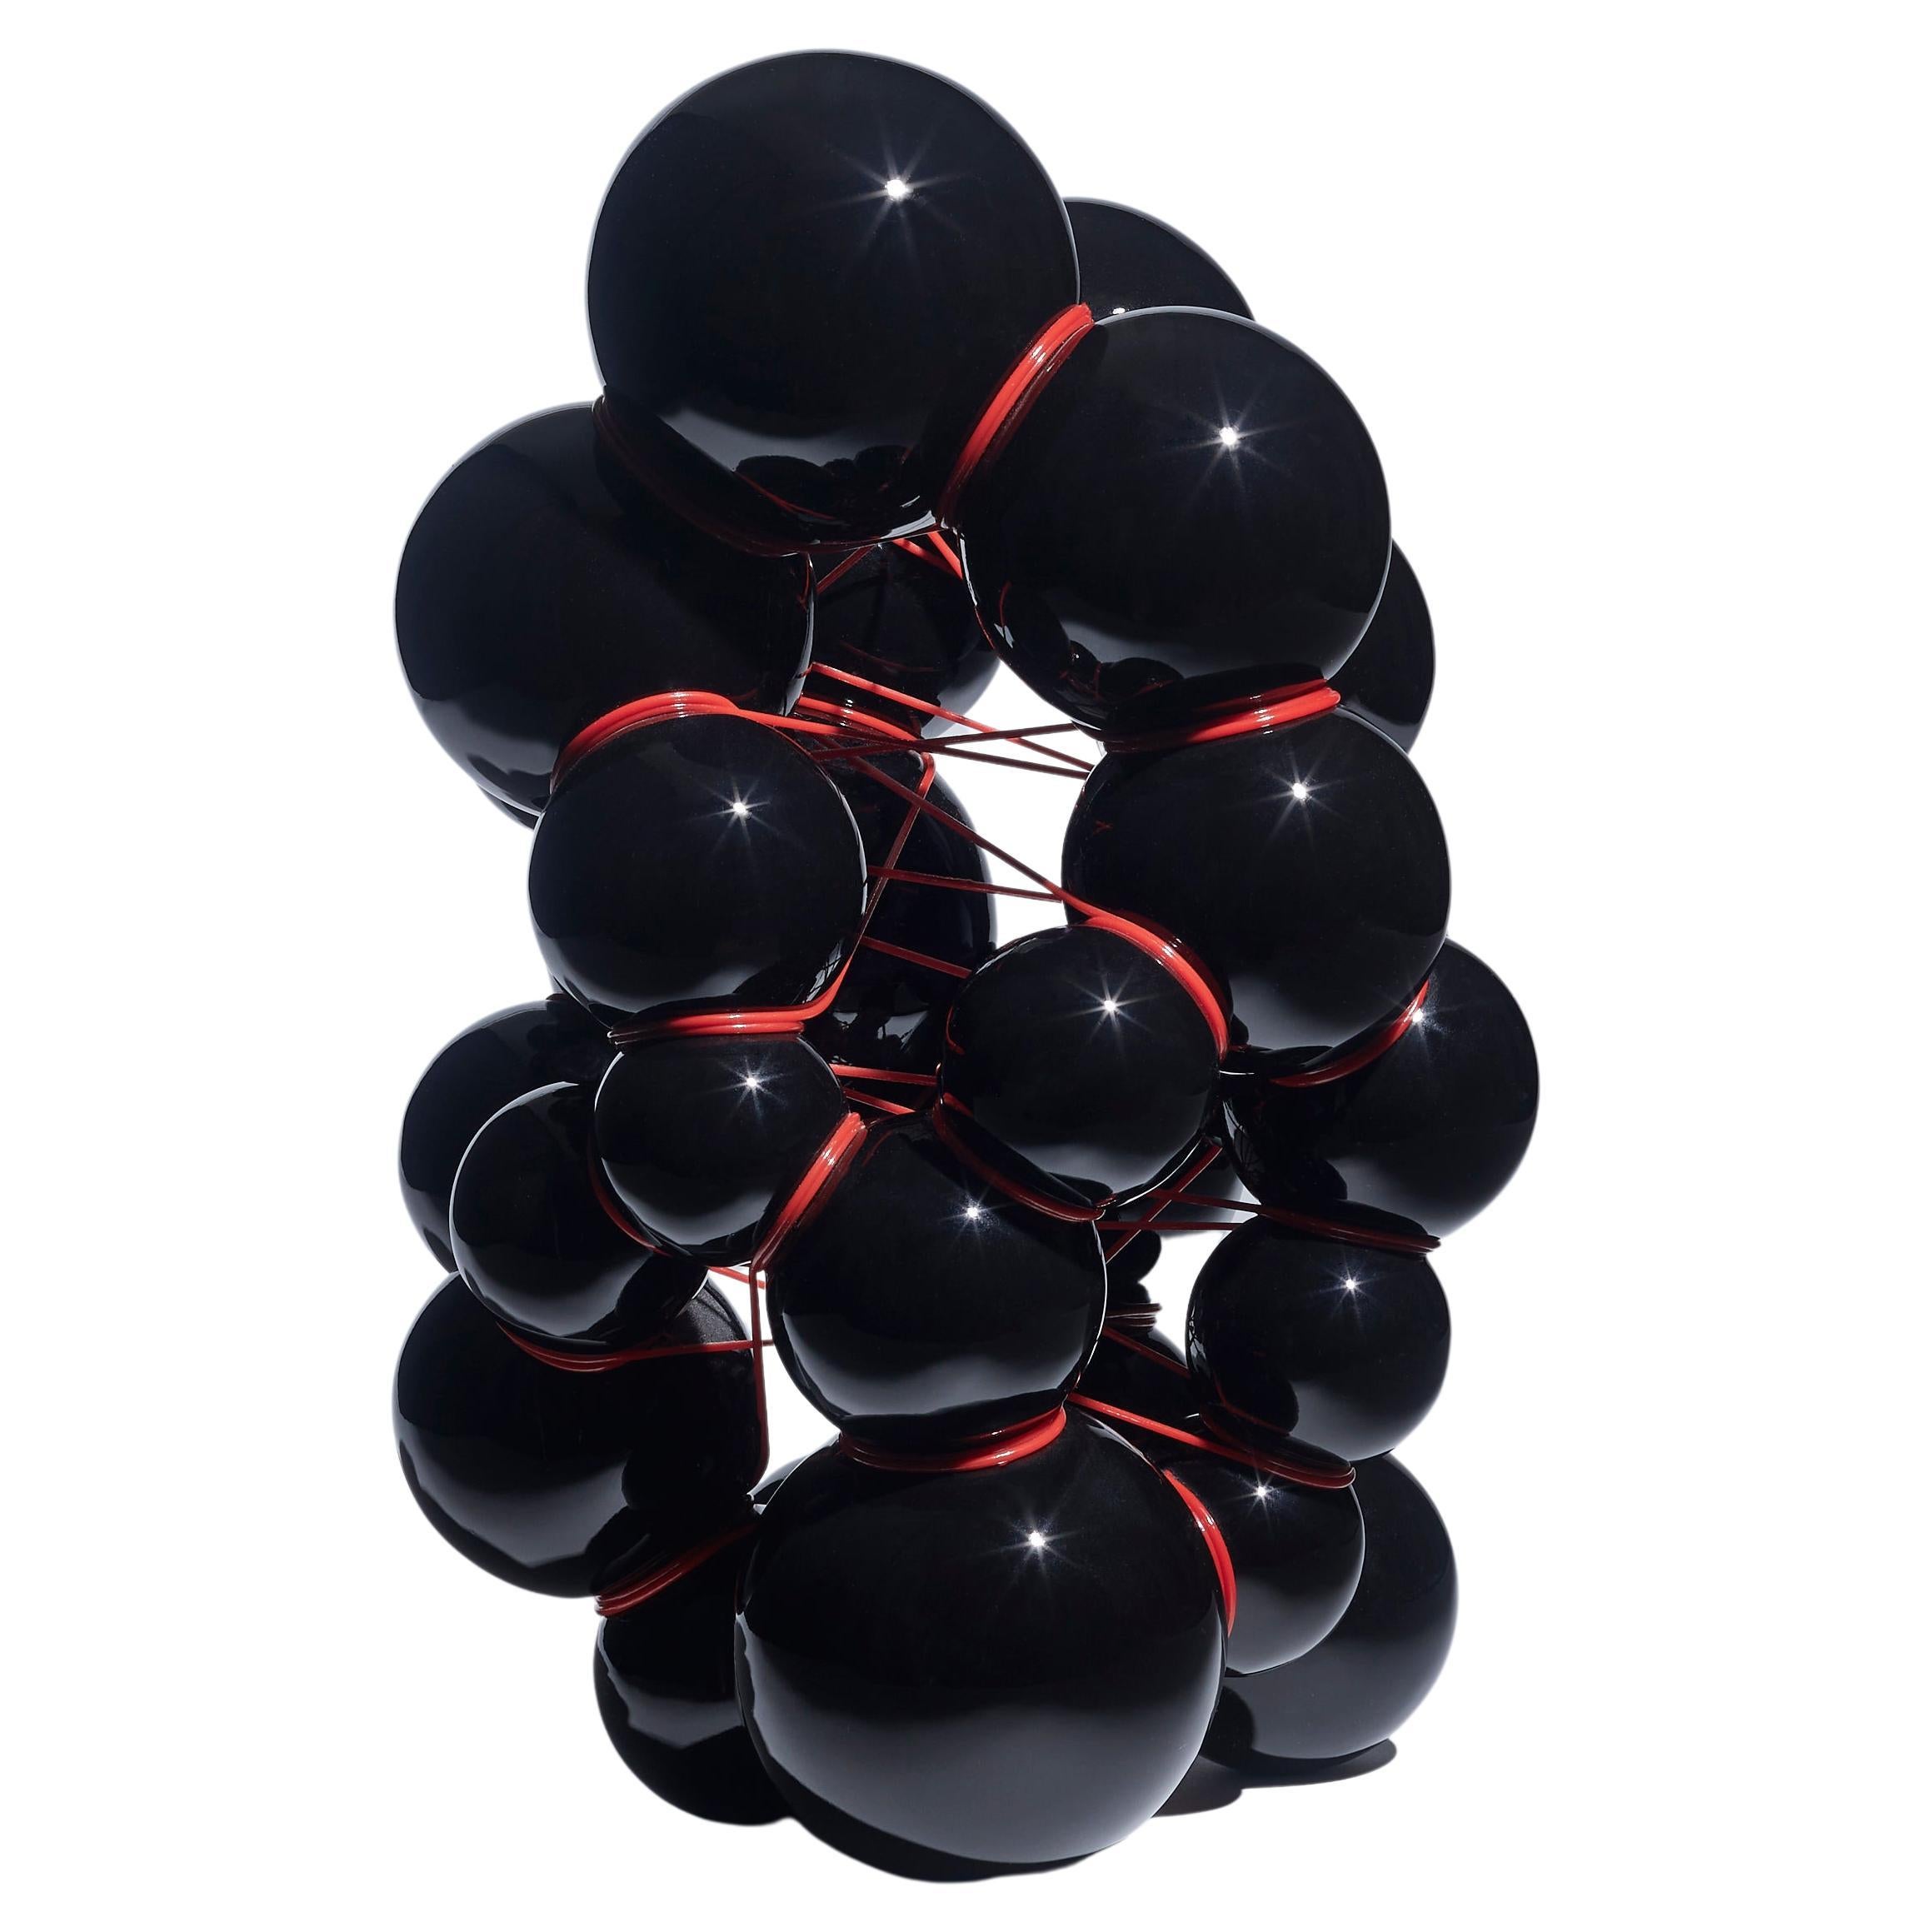 Black and Red Ceramic and PVC Sculpture, Steen Ipsen  For Sale